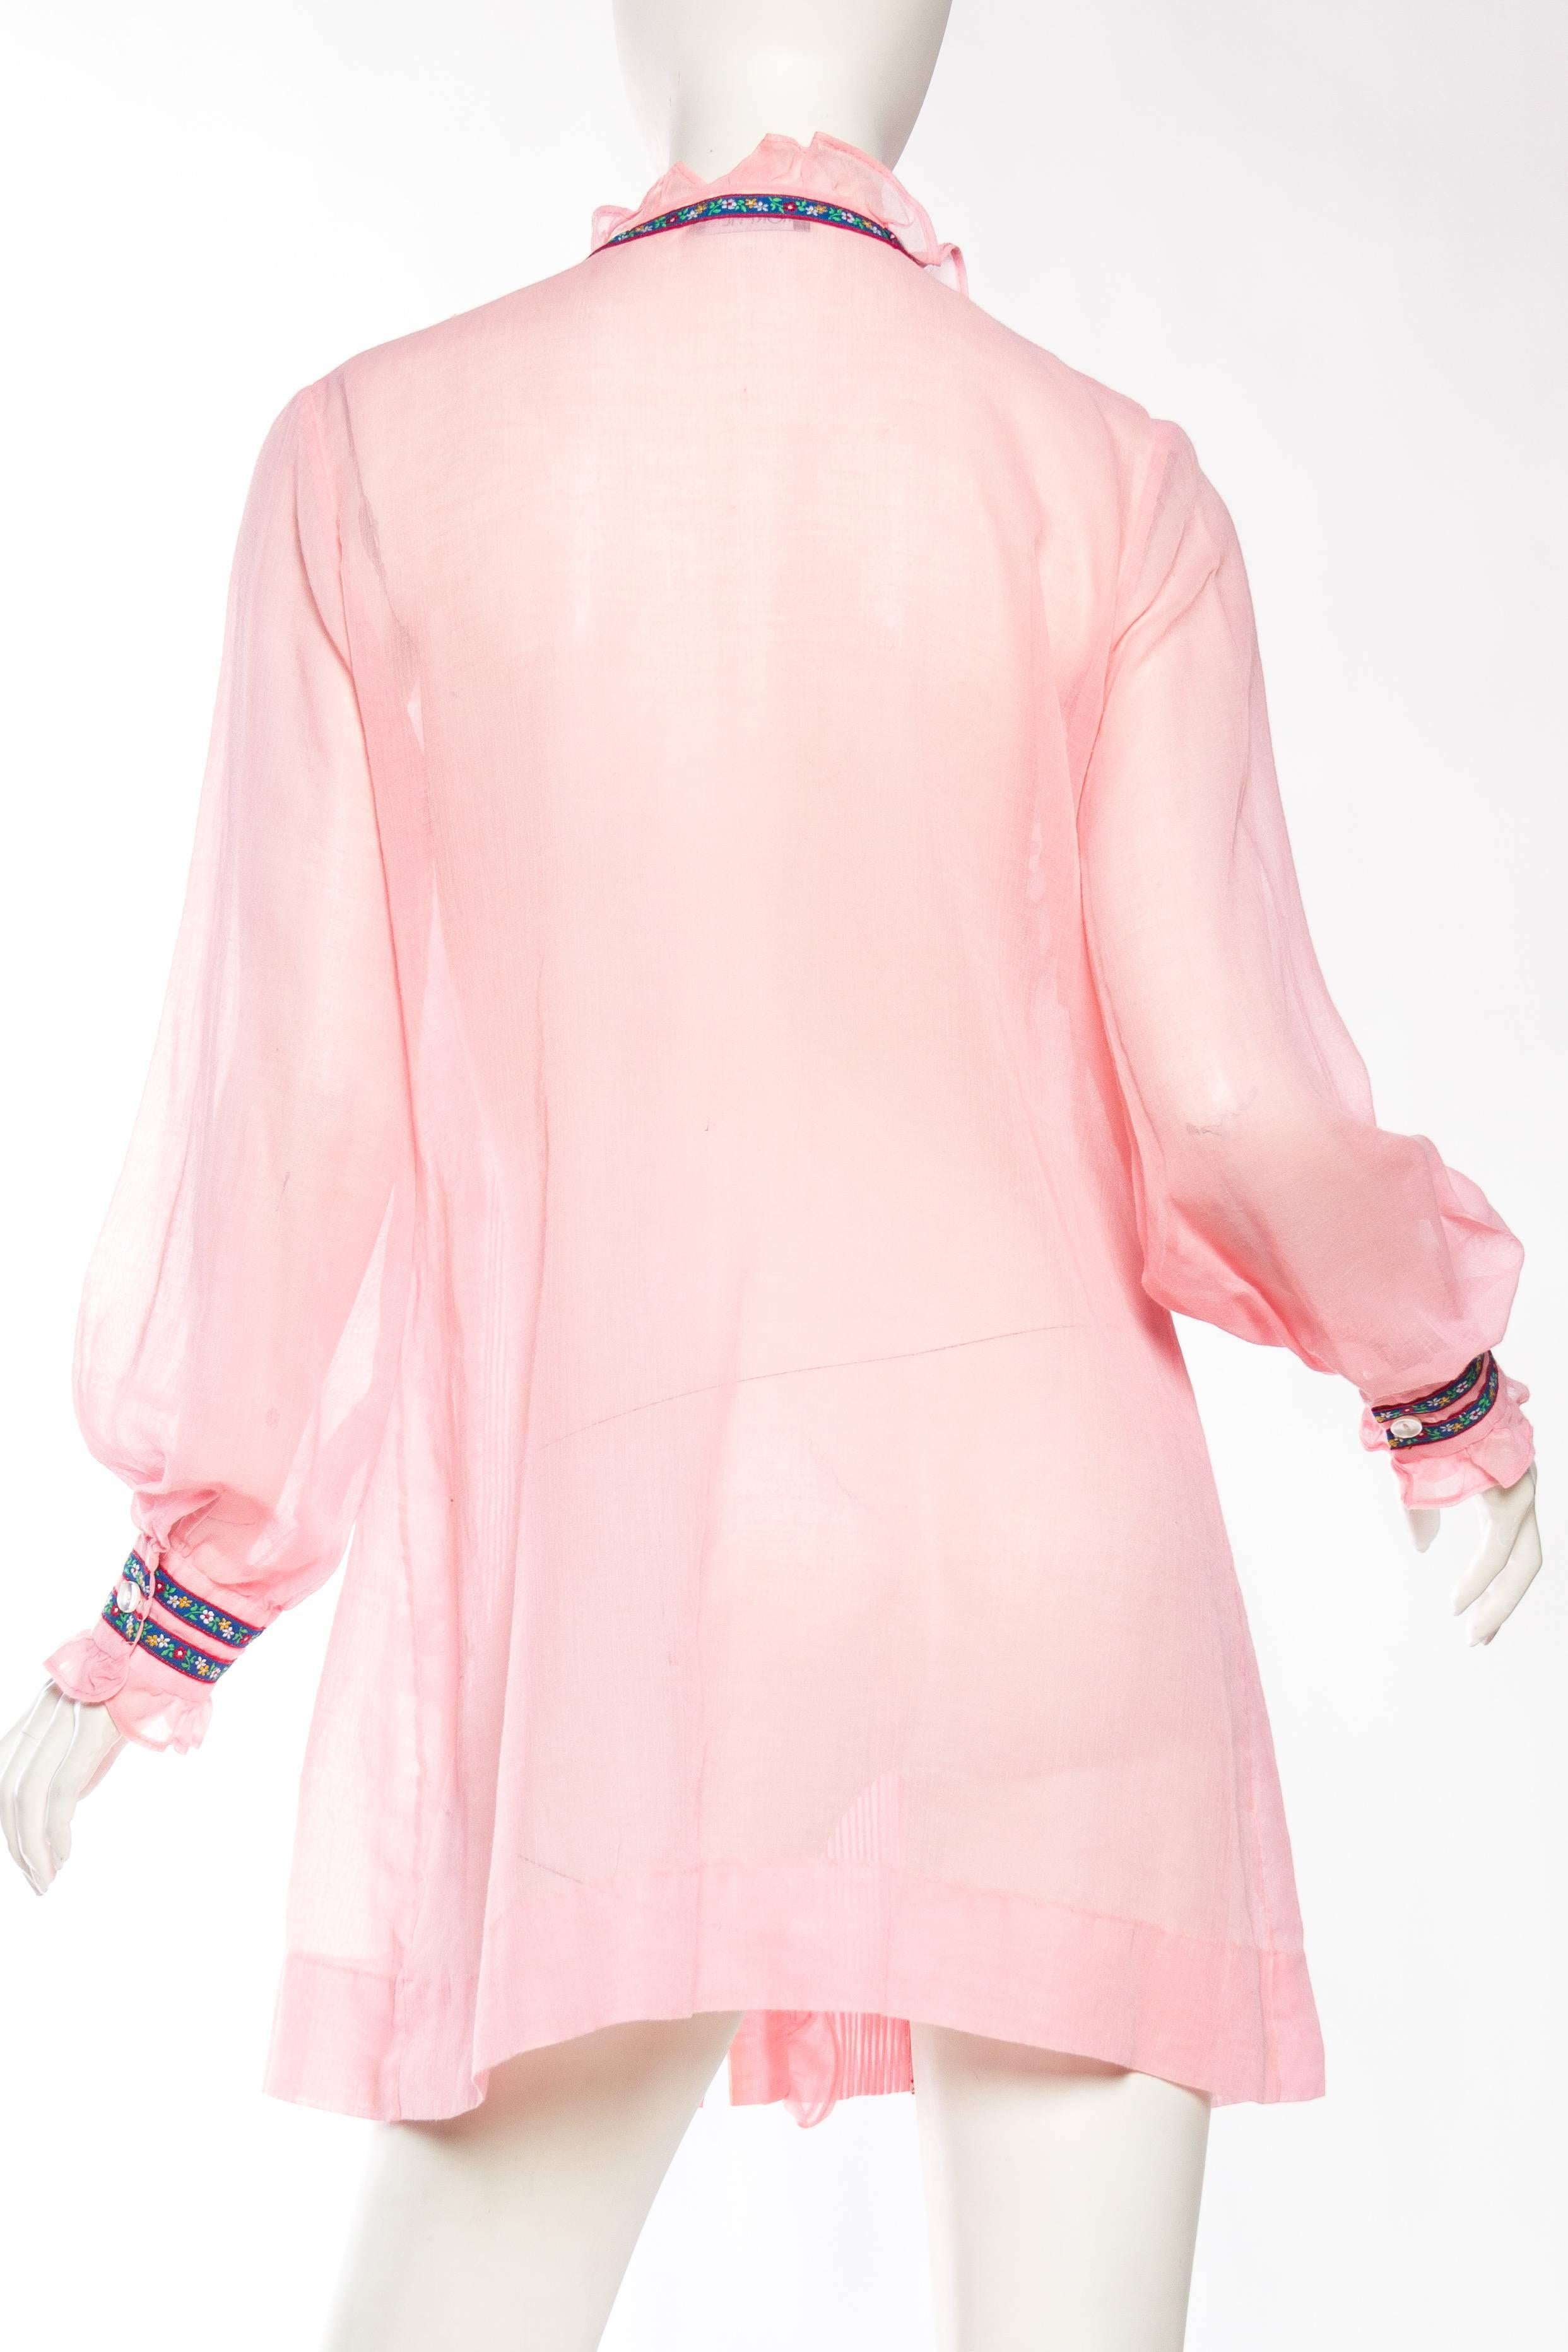 Pink Gucci Style 1960s Baby-Doll Dress with Embroidery and Bows